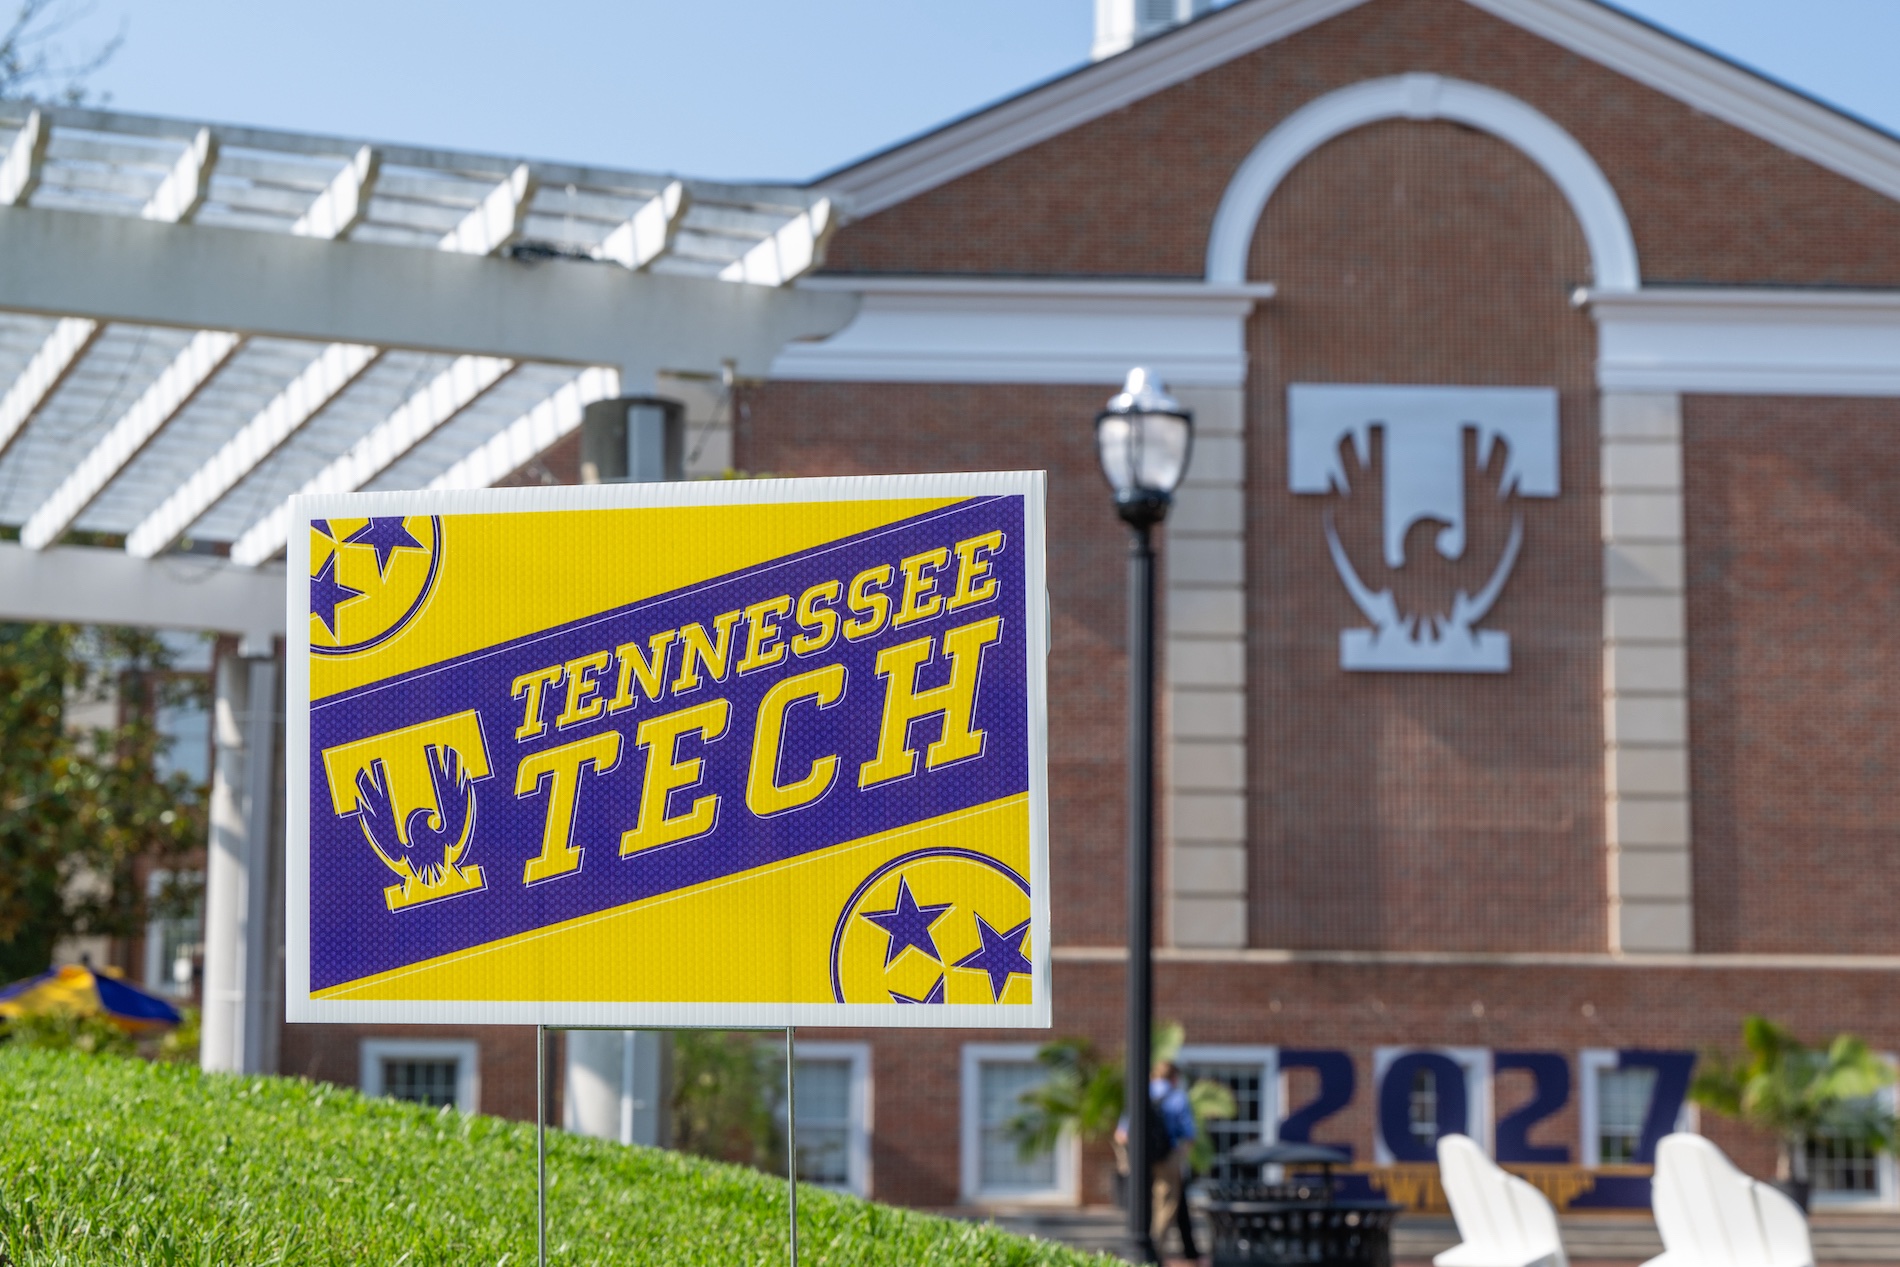 A Tennessee Tech yard sign